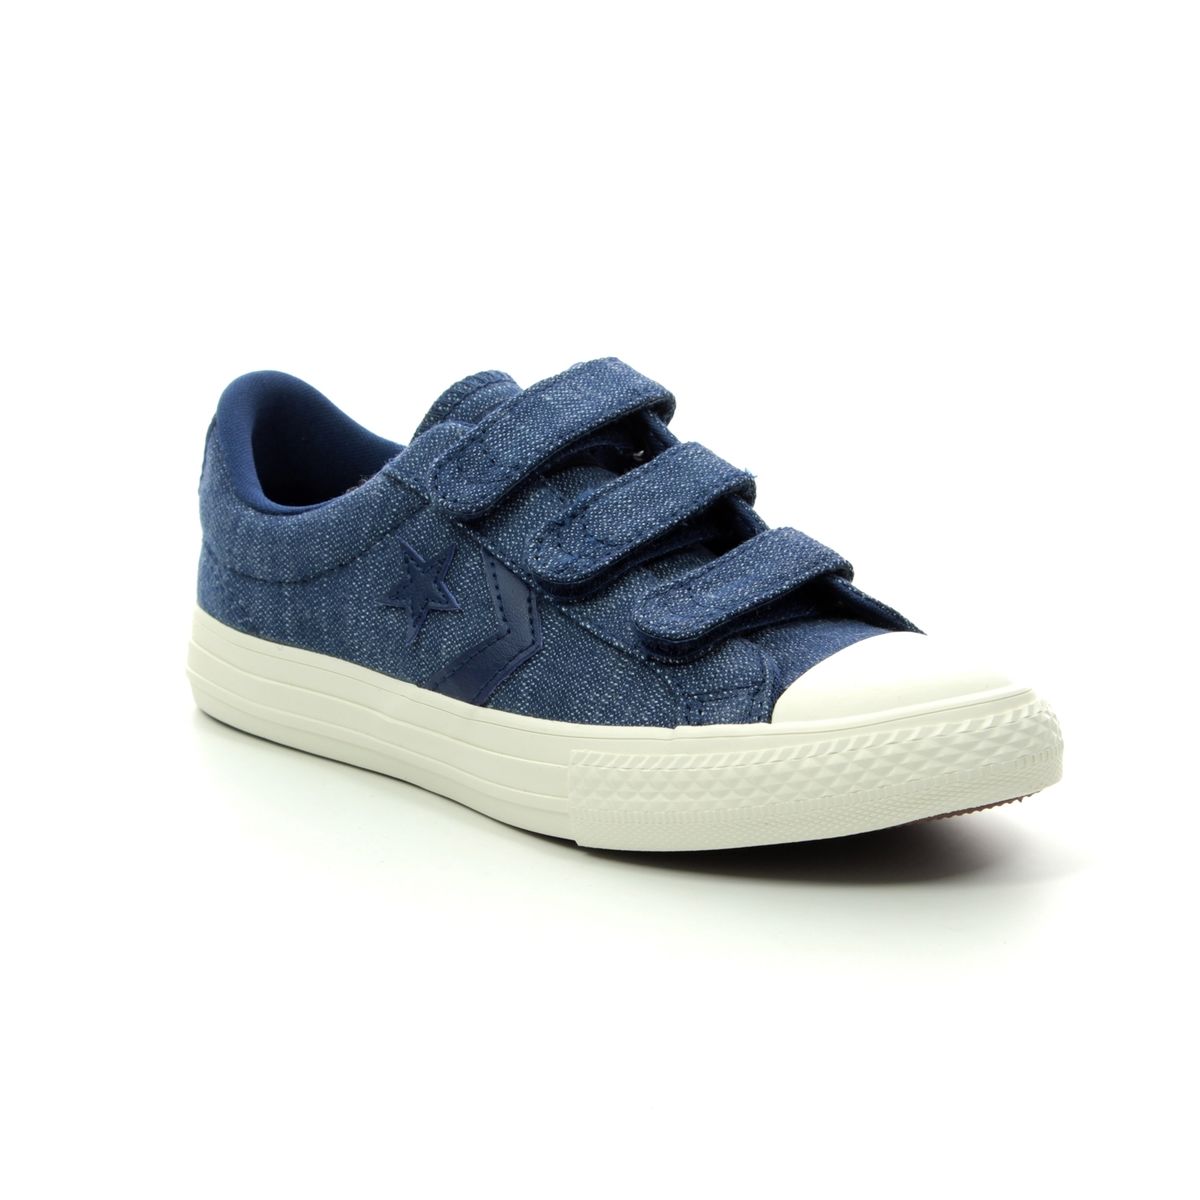 Converse Star Player 3v Denim blue Kids Boys Trainers 664434C-004 in a Plain Textile in Size 1